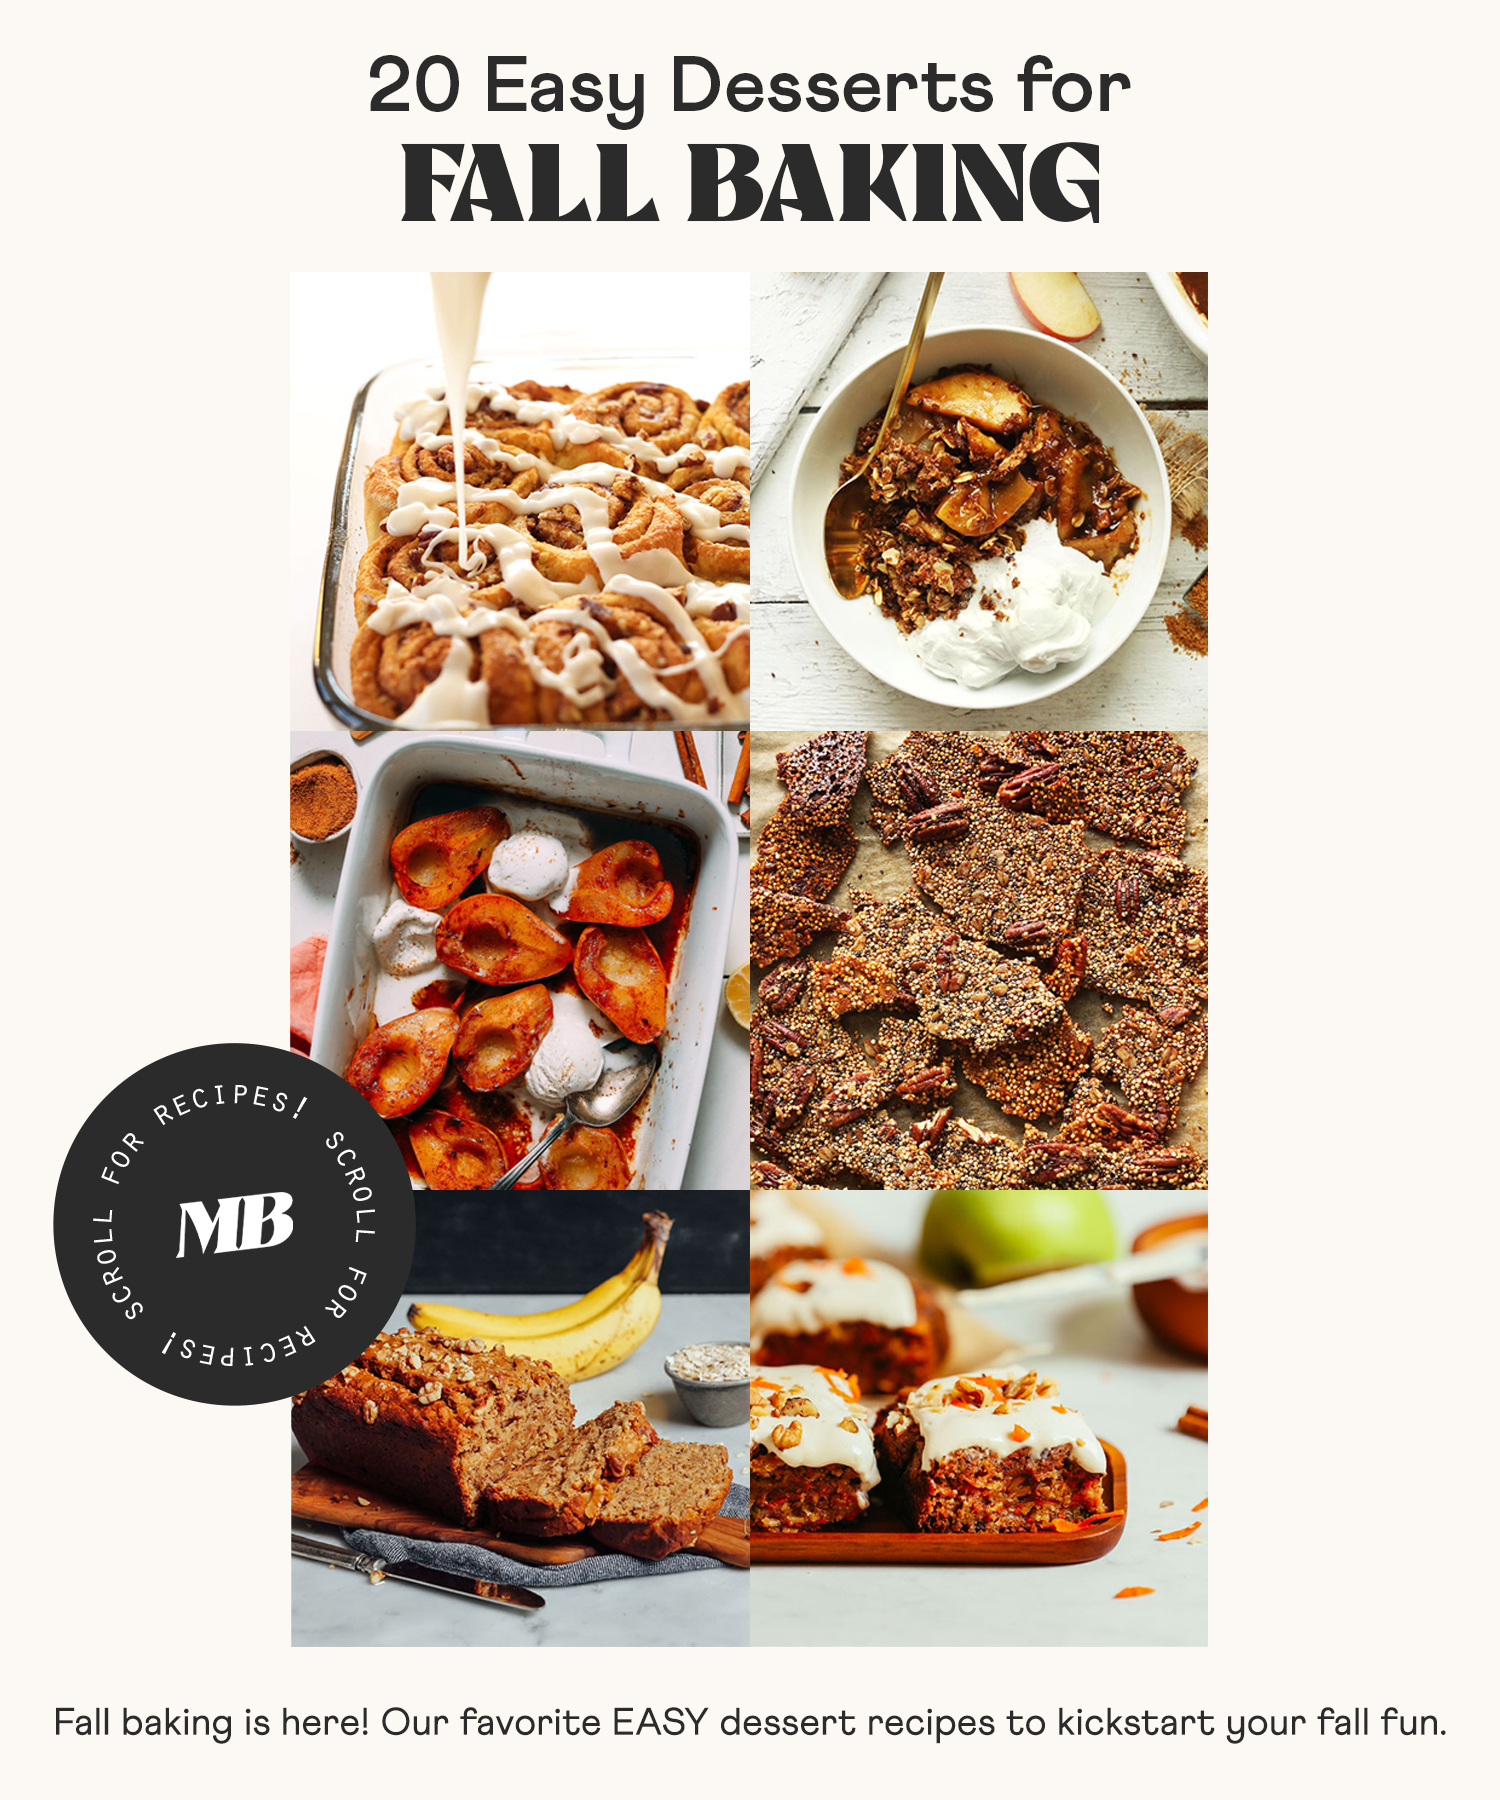 Pumpkin cinnamon rolls, apple crisp, baked pears, and other desserts for fall baking